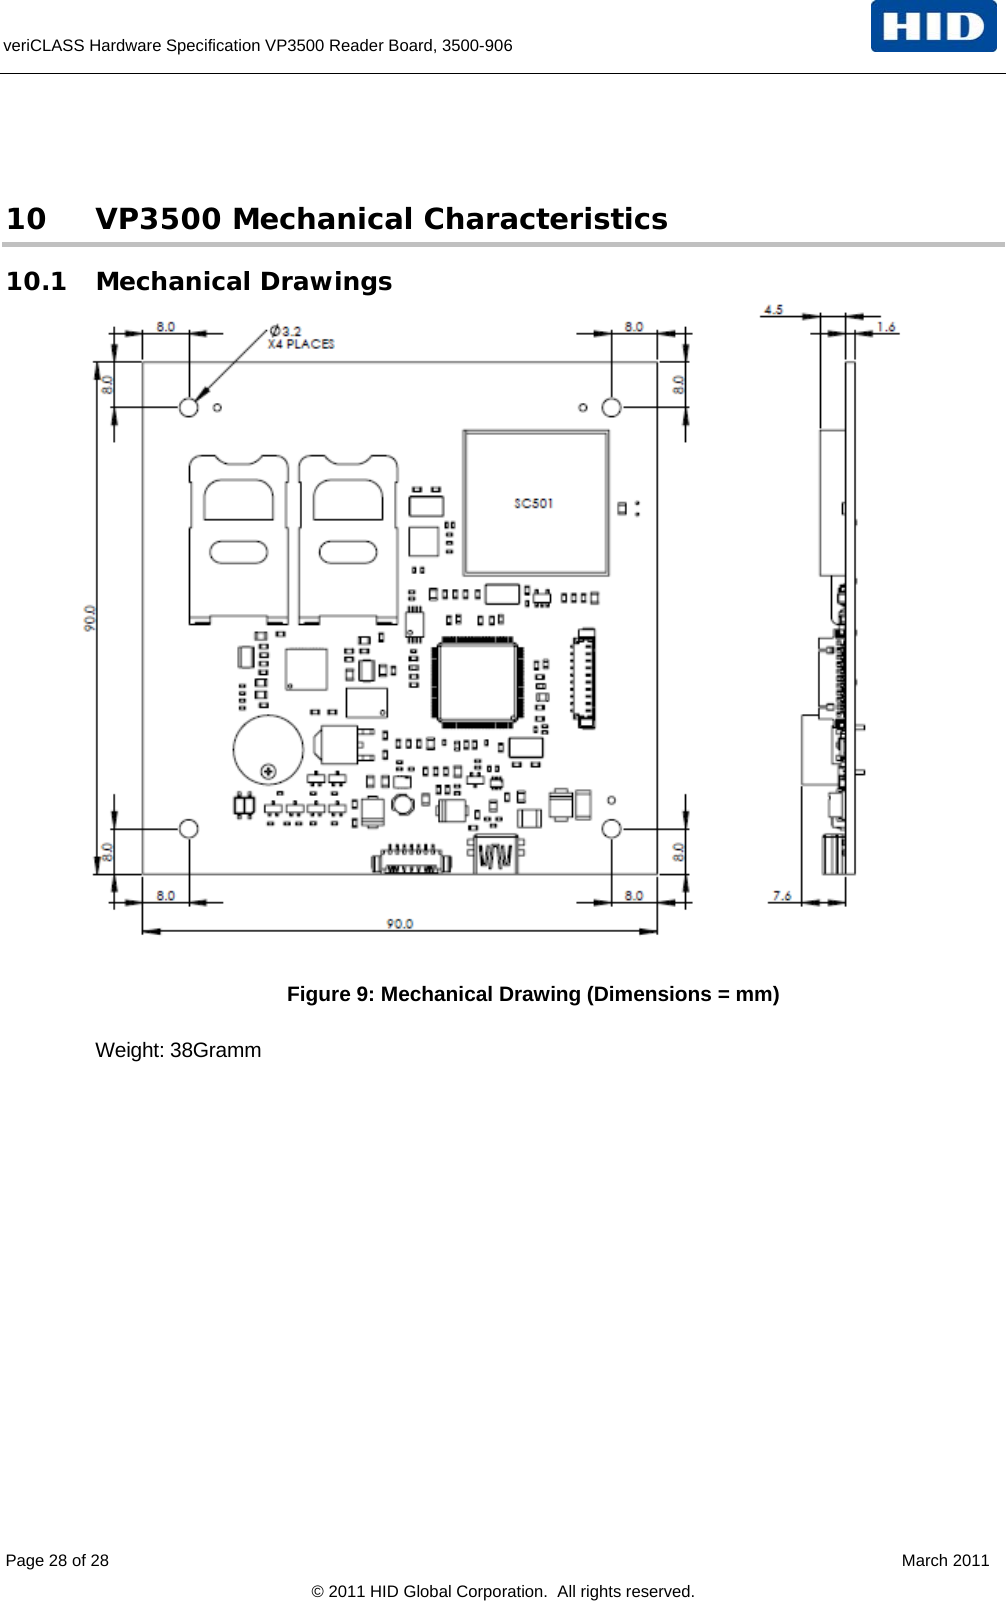  Page 28 of 28    March 2011 © 2011 HID Global Corporation.  All rights reserved. veriCLASS Hardware Specification VP3500 Reader Board, 3500-906    10 VP3500 Mechanical Characteristics 10.1 Mechanical Drawings  Figure 9: Mechanical Drawing (Dimensions = mm)  Weight: 38Gramm  